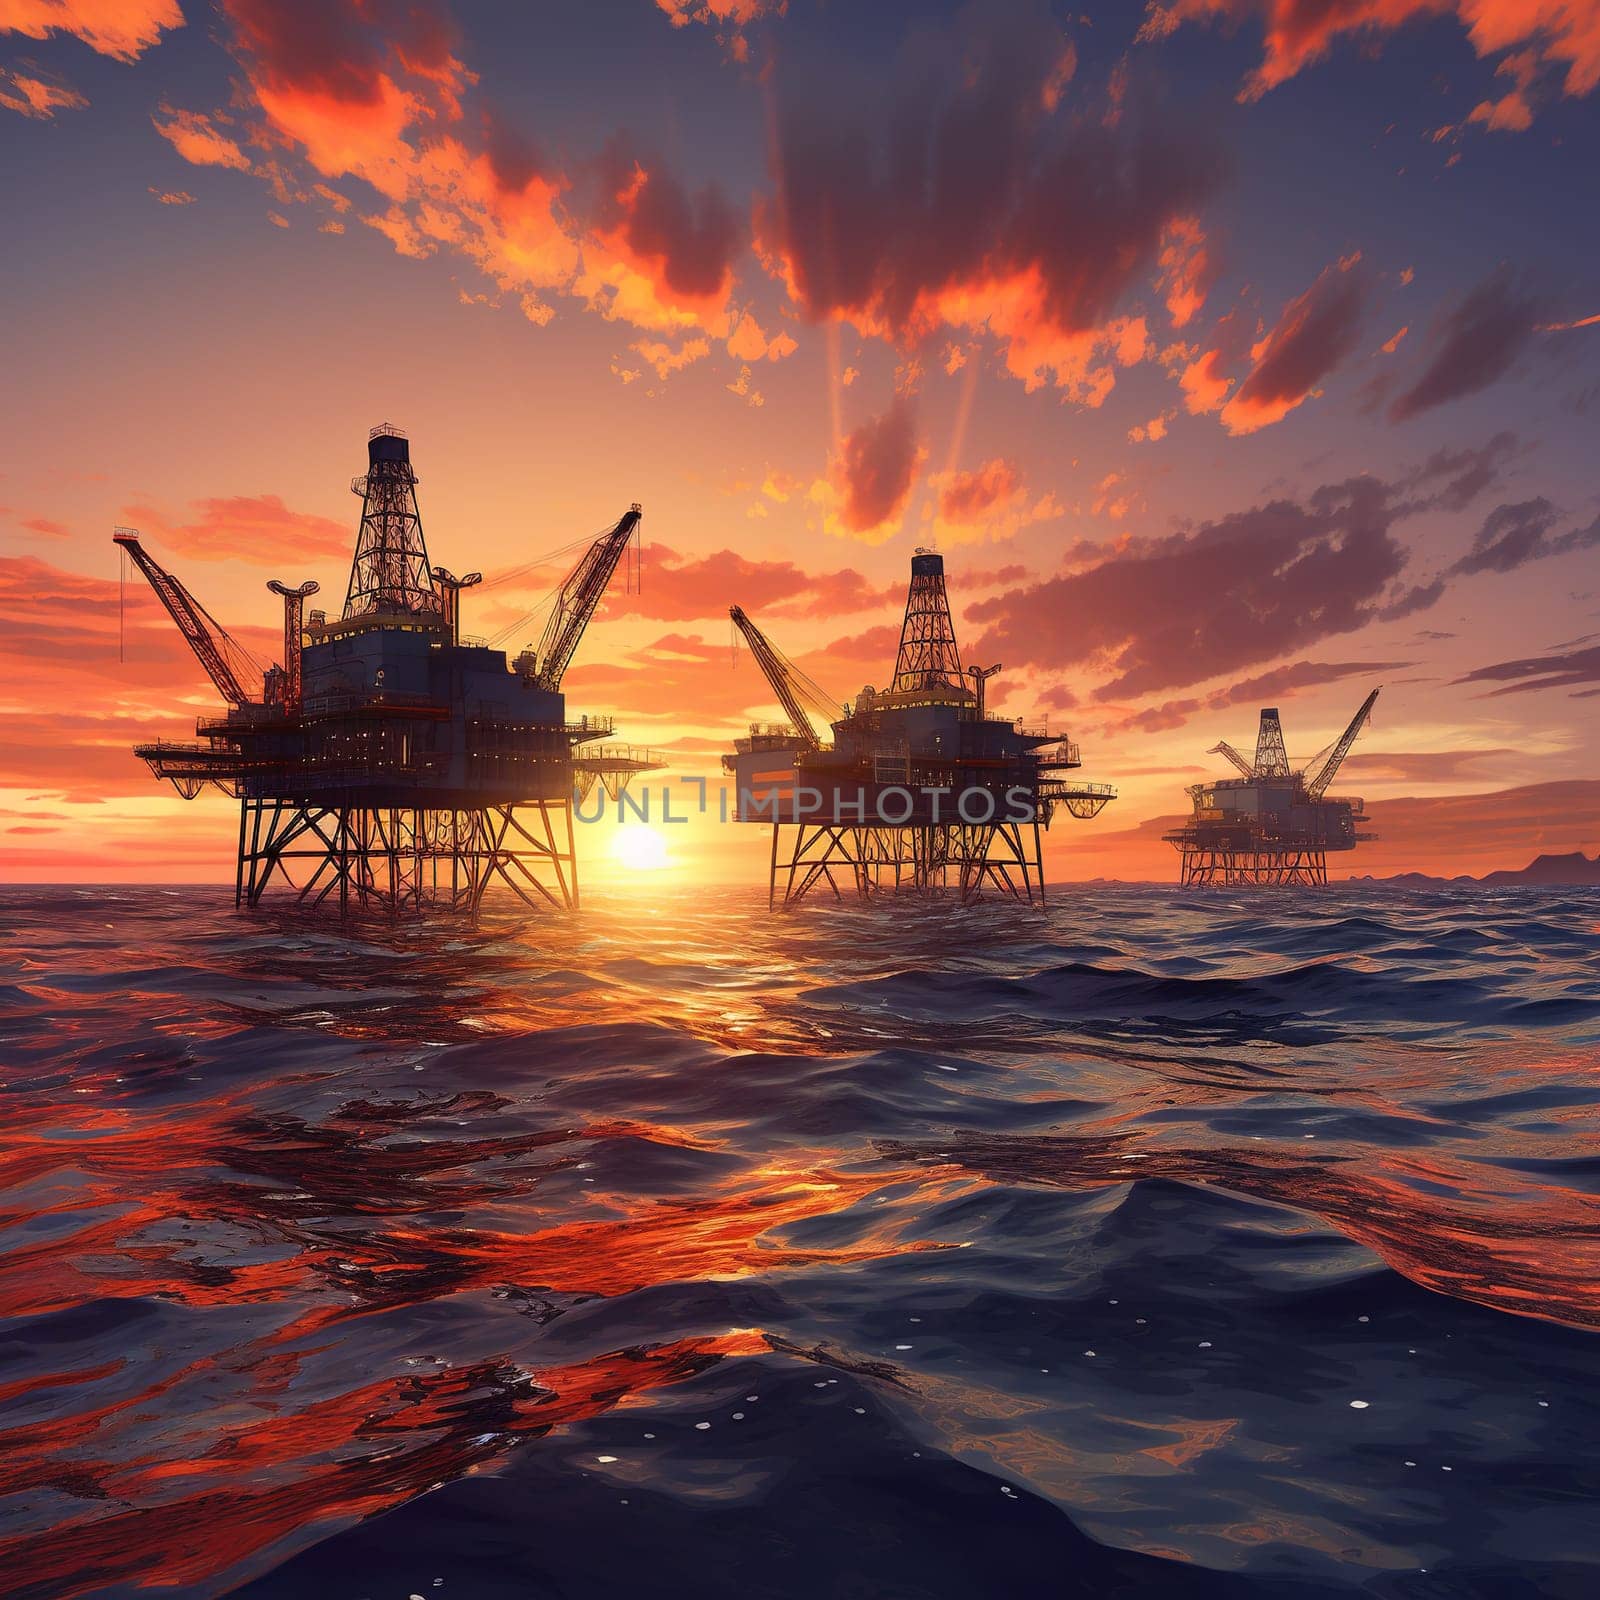 Oil platforms in the ocean, oil drilling from the bottom of the ocean, industrial concept by Kadula